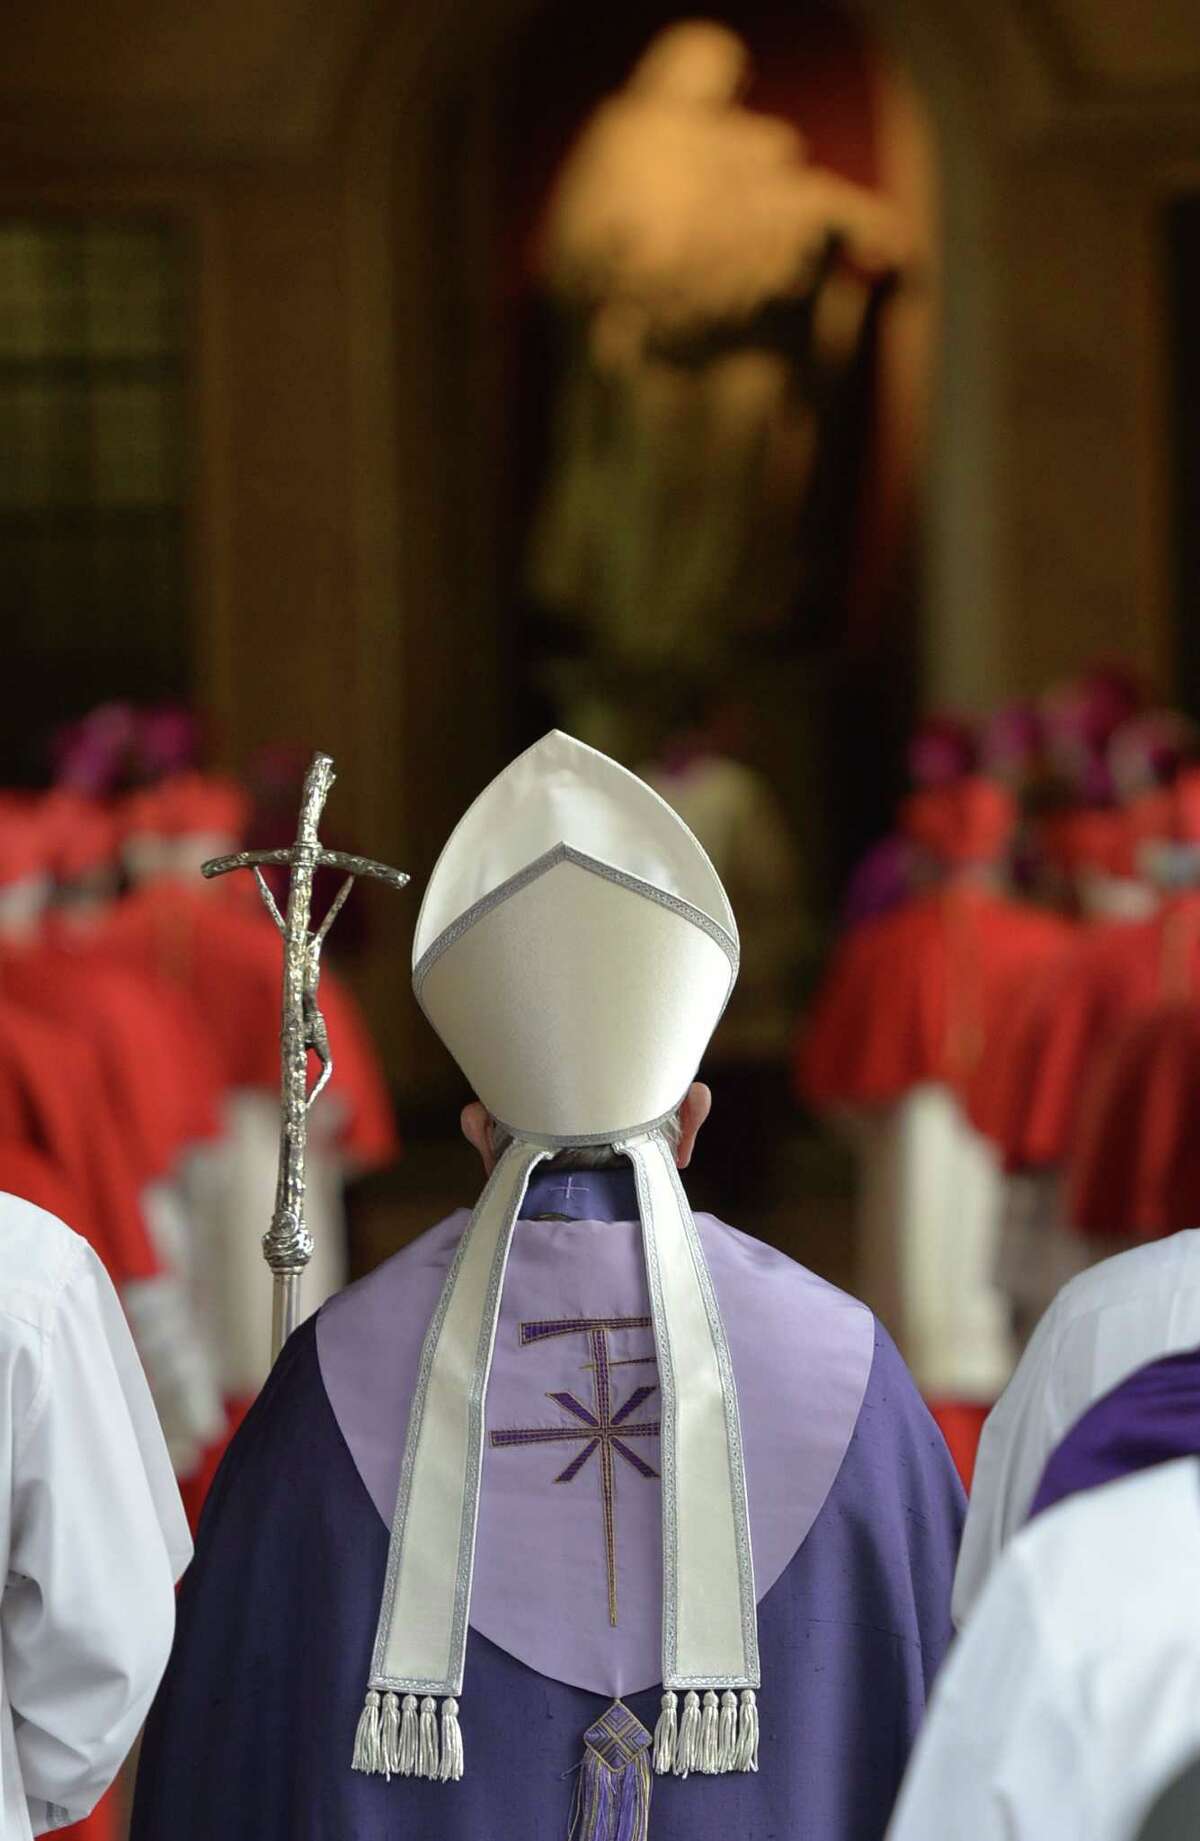 Pope Francis arrives at St. Sabina’s Basilica in Rome to lead the Ash Wednesday Mass.